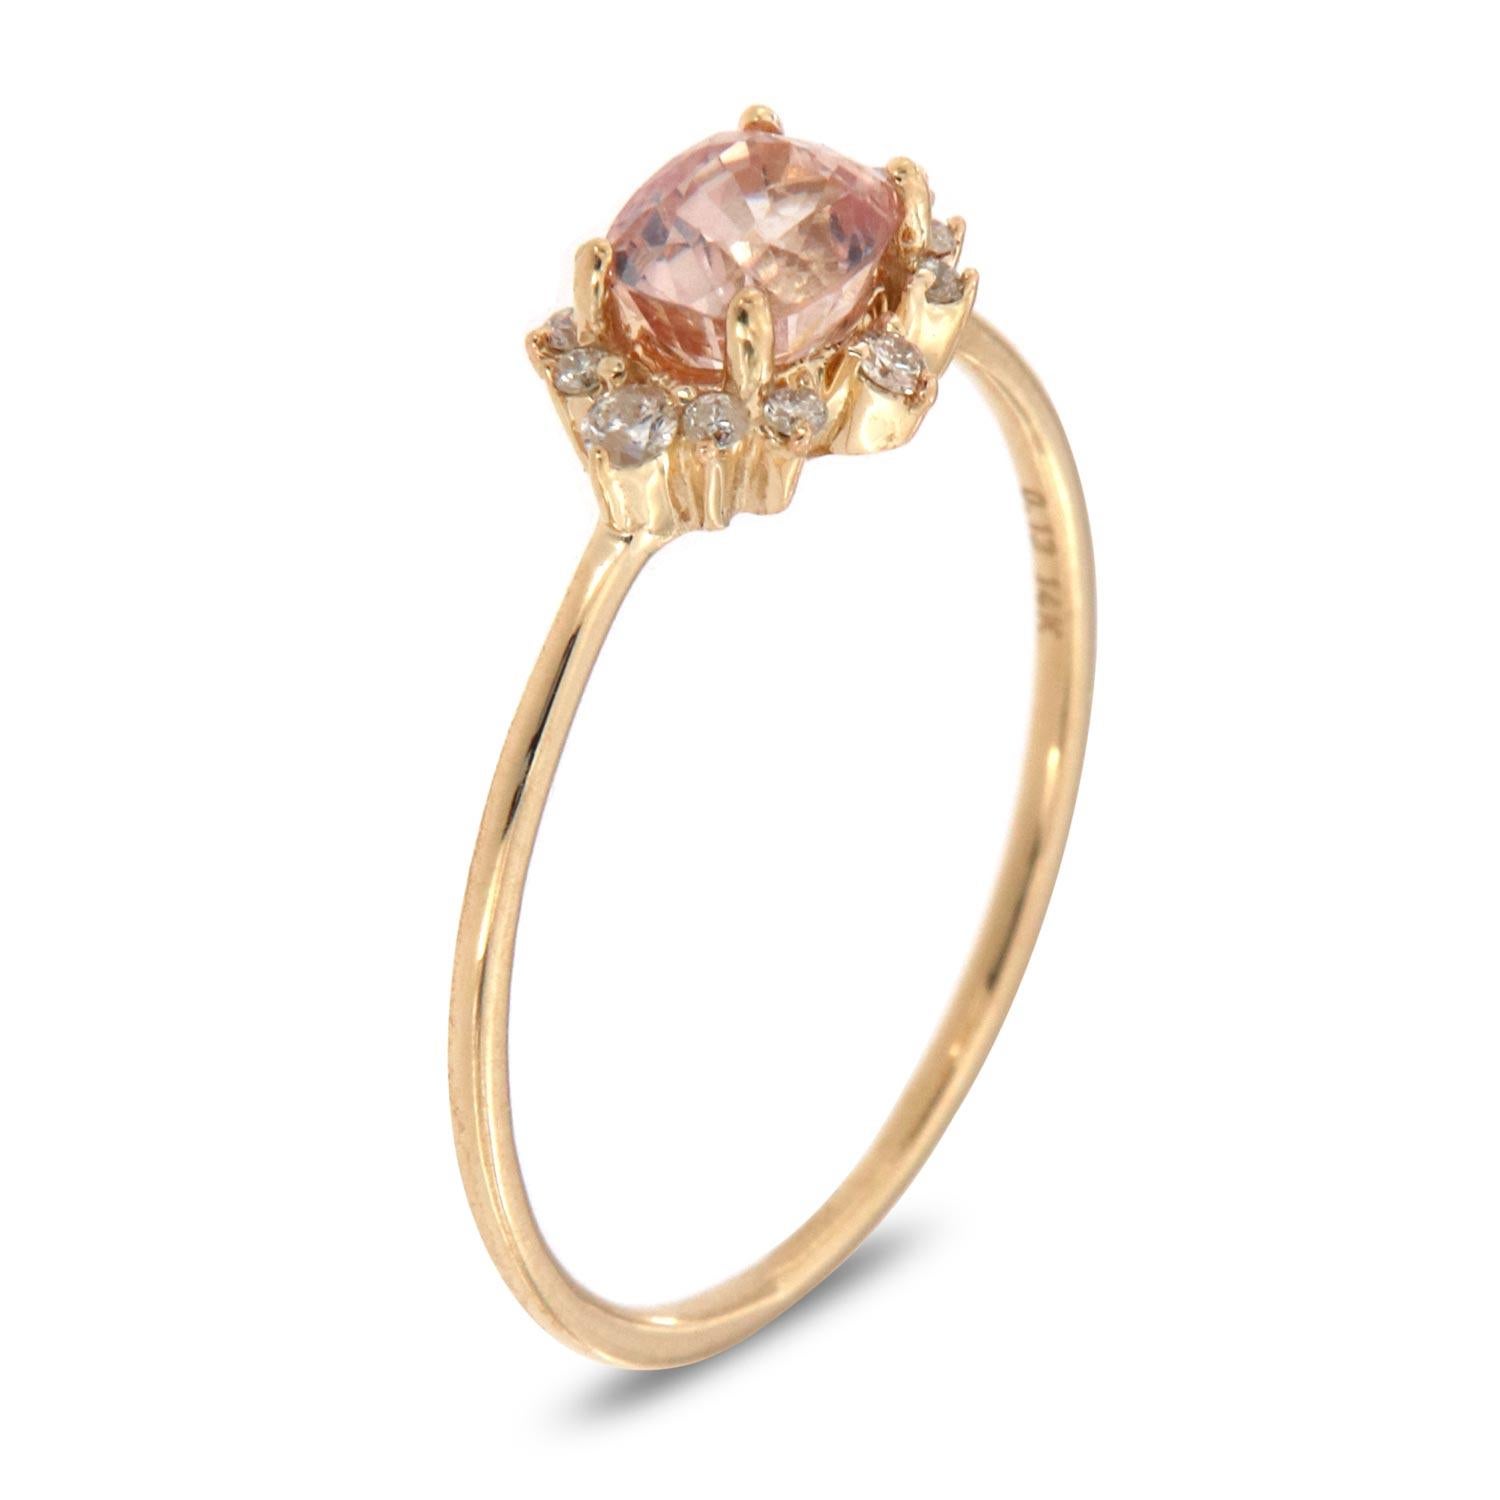 This petite fashion ring is impressive in its vintage appeal, featuring a natural pink cushion shape sapphire, accented with a cluster of round brilliant diamonds. Experience the difference in person!

Product details: 

Center Gemstone Type: